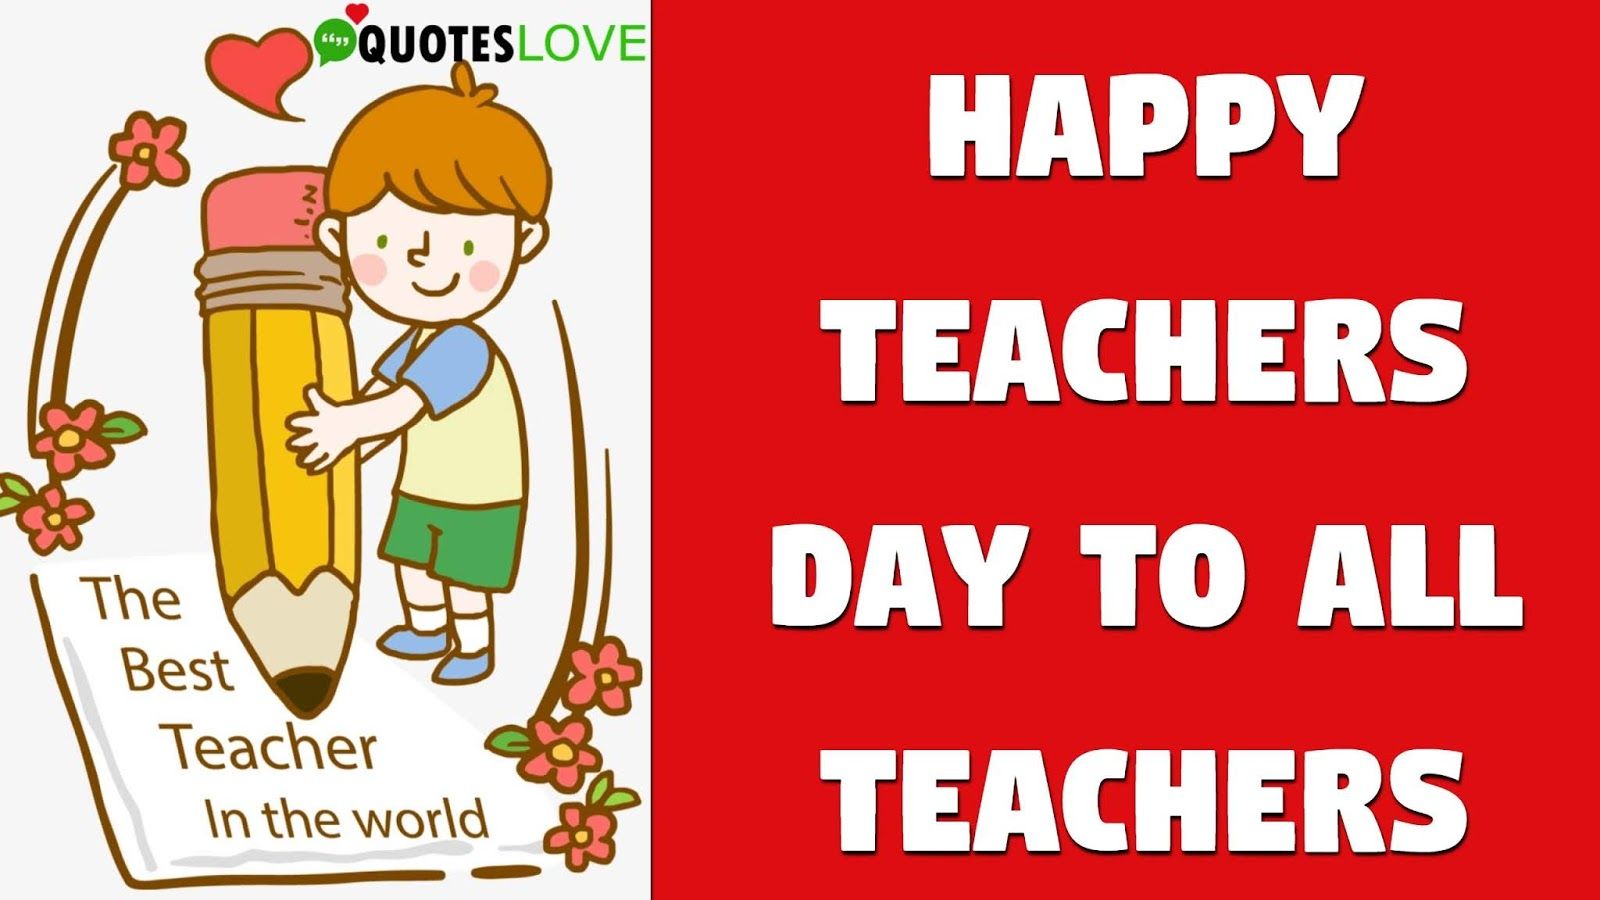 (New) Happy Teachers Day 2020: Quotes, Status, Wishes, Image and Messages